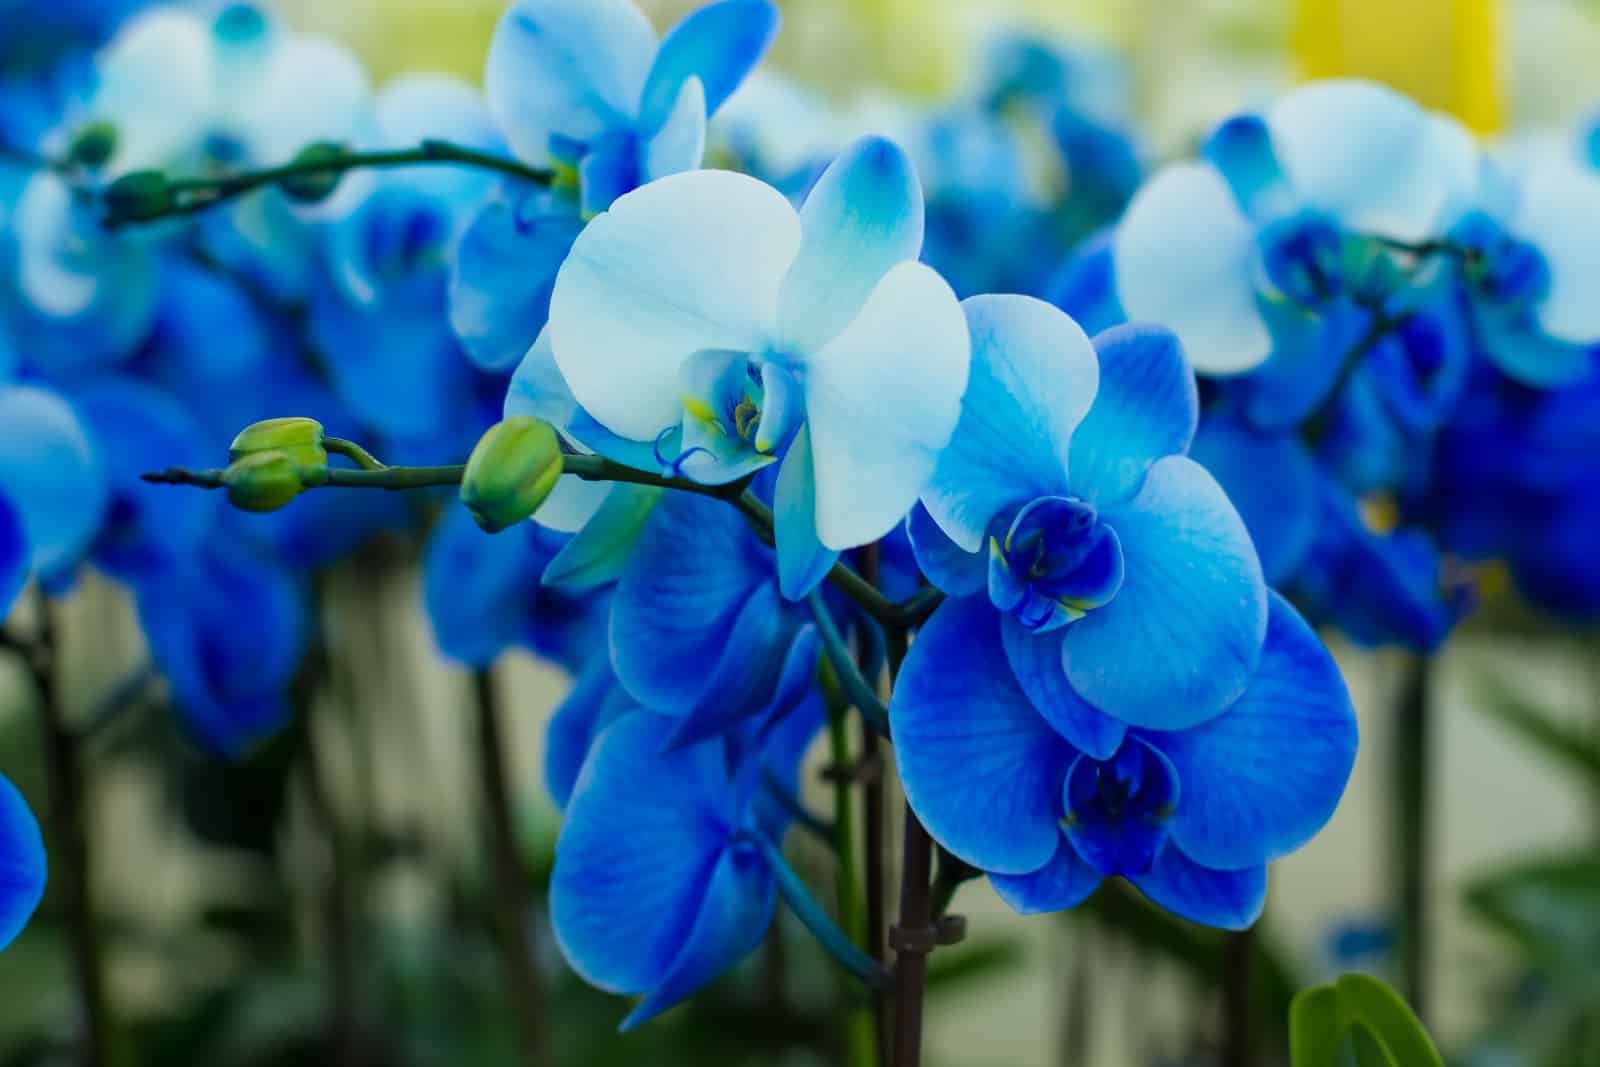 bouquet of beautiful blue orchids